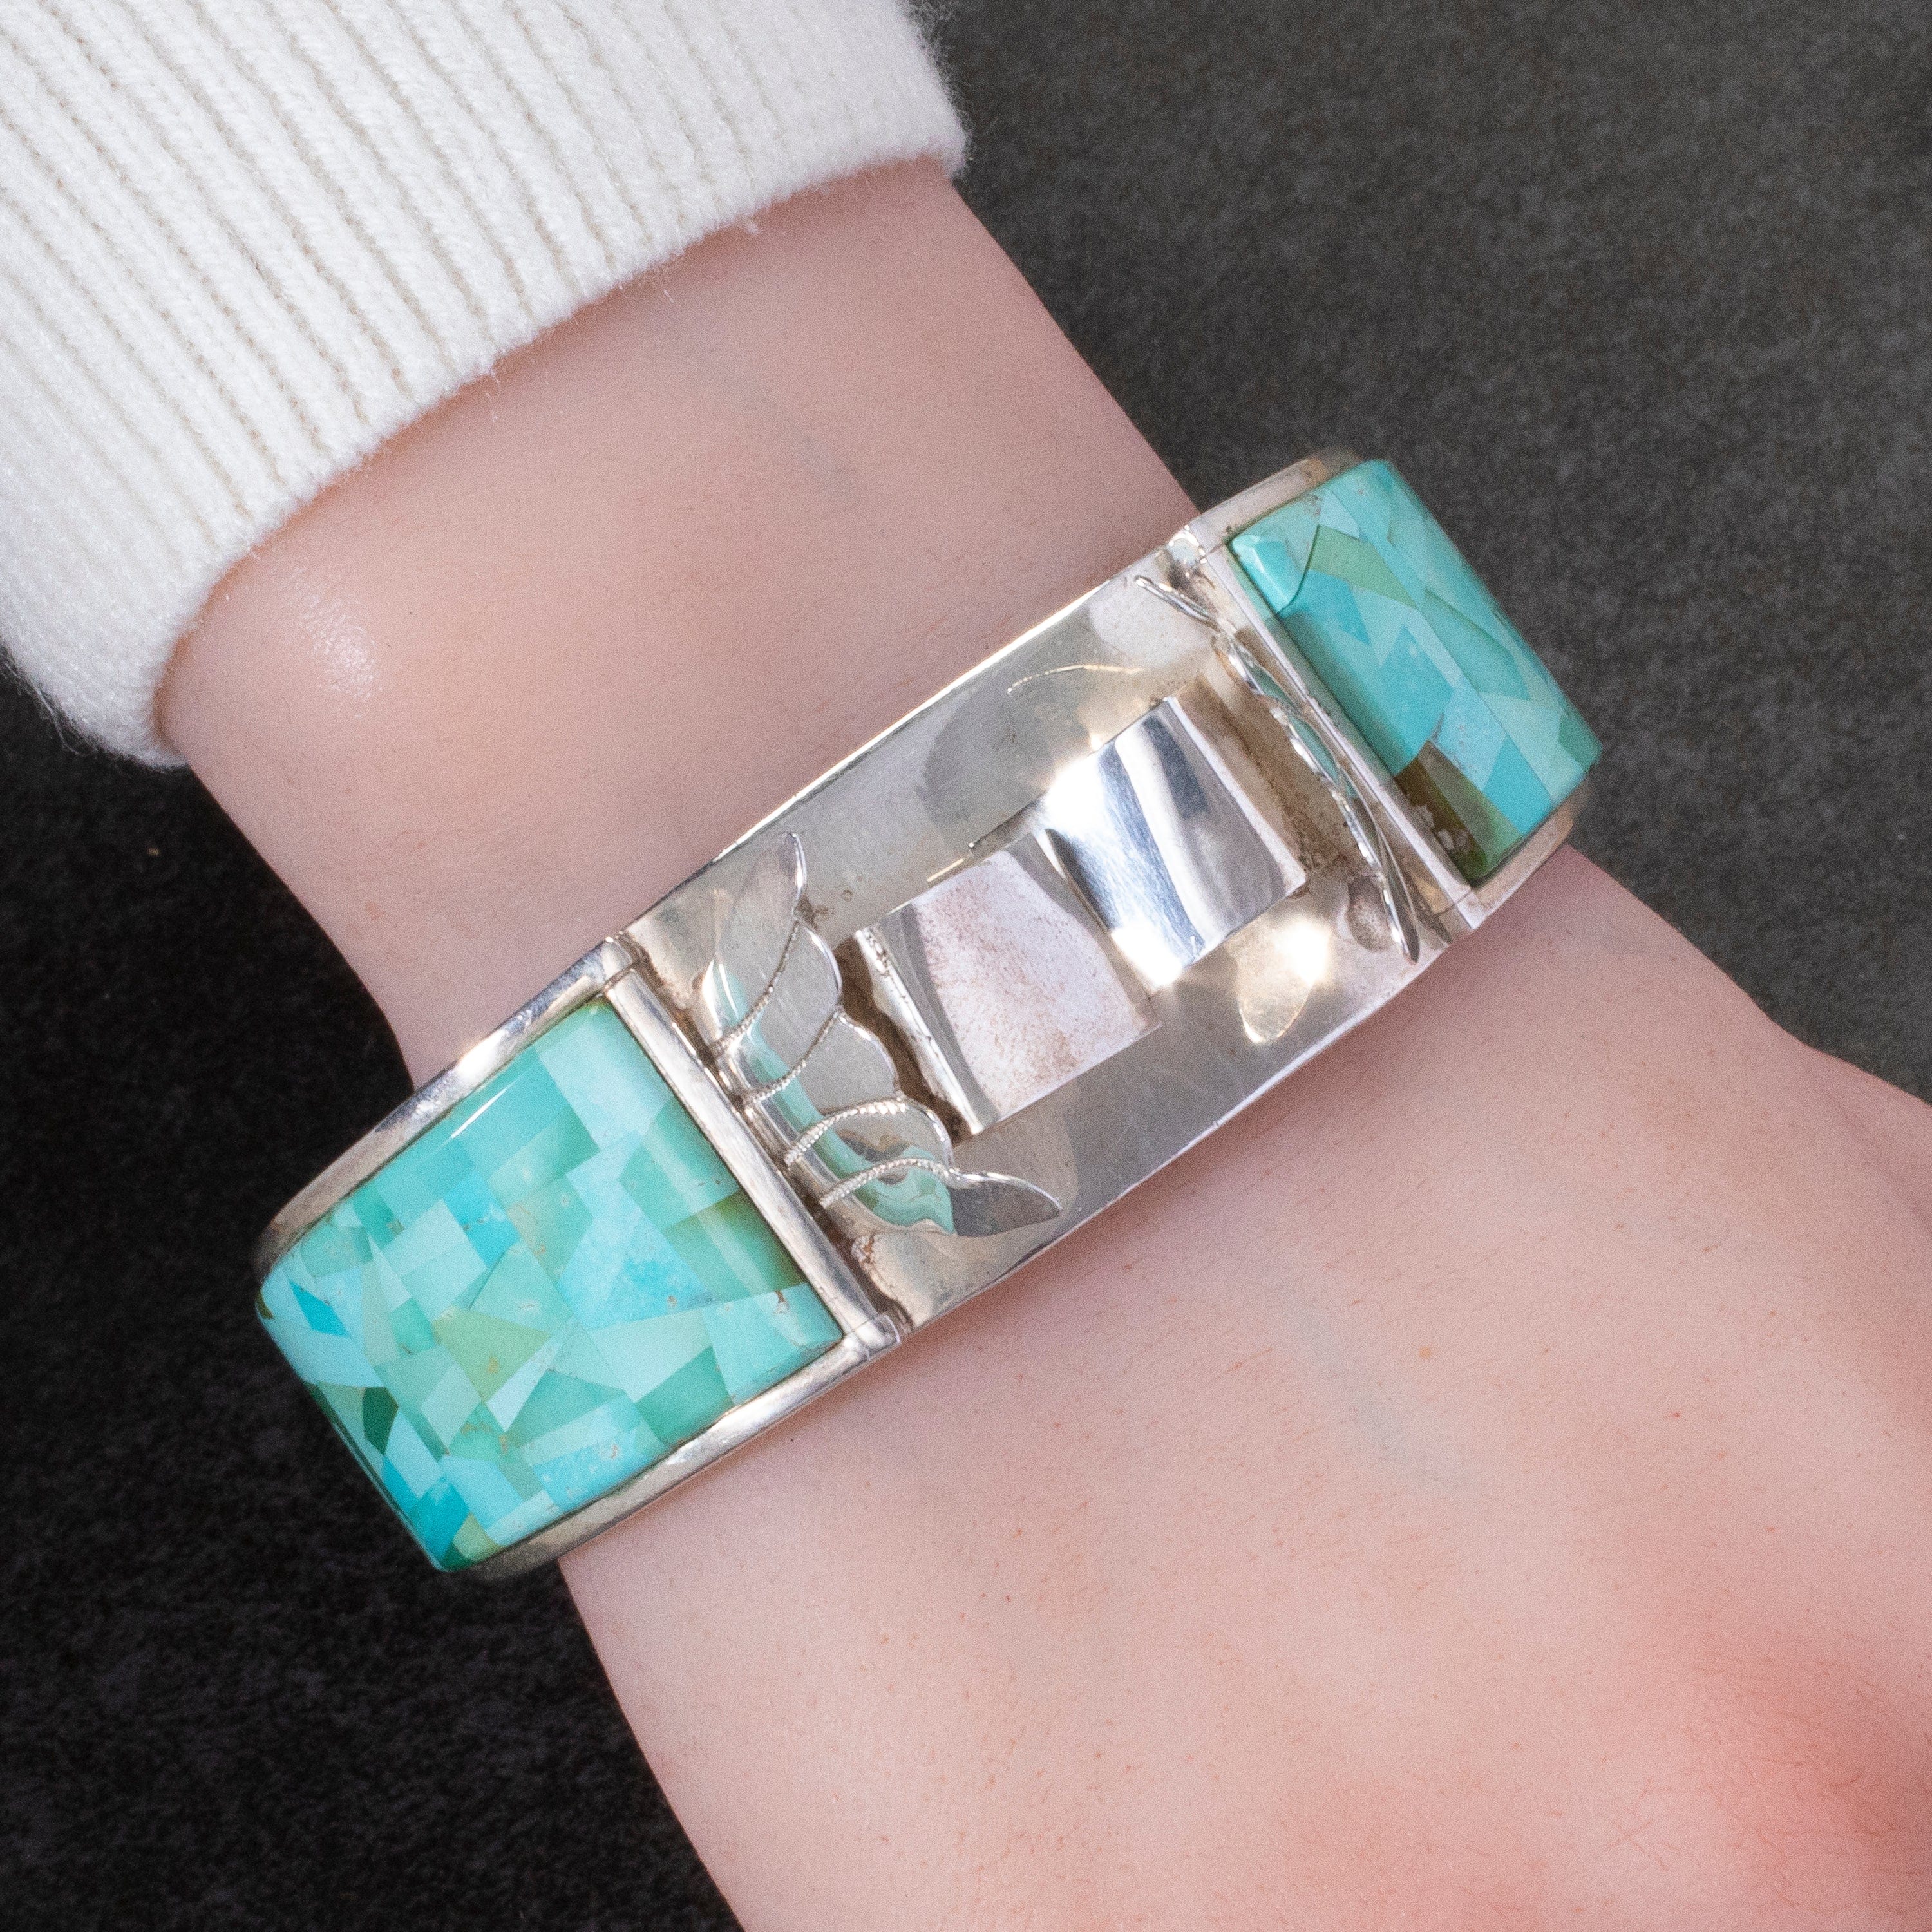 Kalifano Native American Jewelry Royston Turquoise Inlay by Calvin Desson with Silverwork by Ronald Tom USA Native American Made 925 Sterling Silver Cuff NAB4800.001